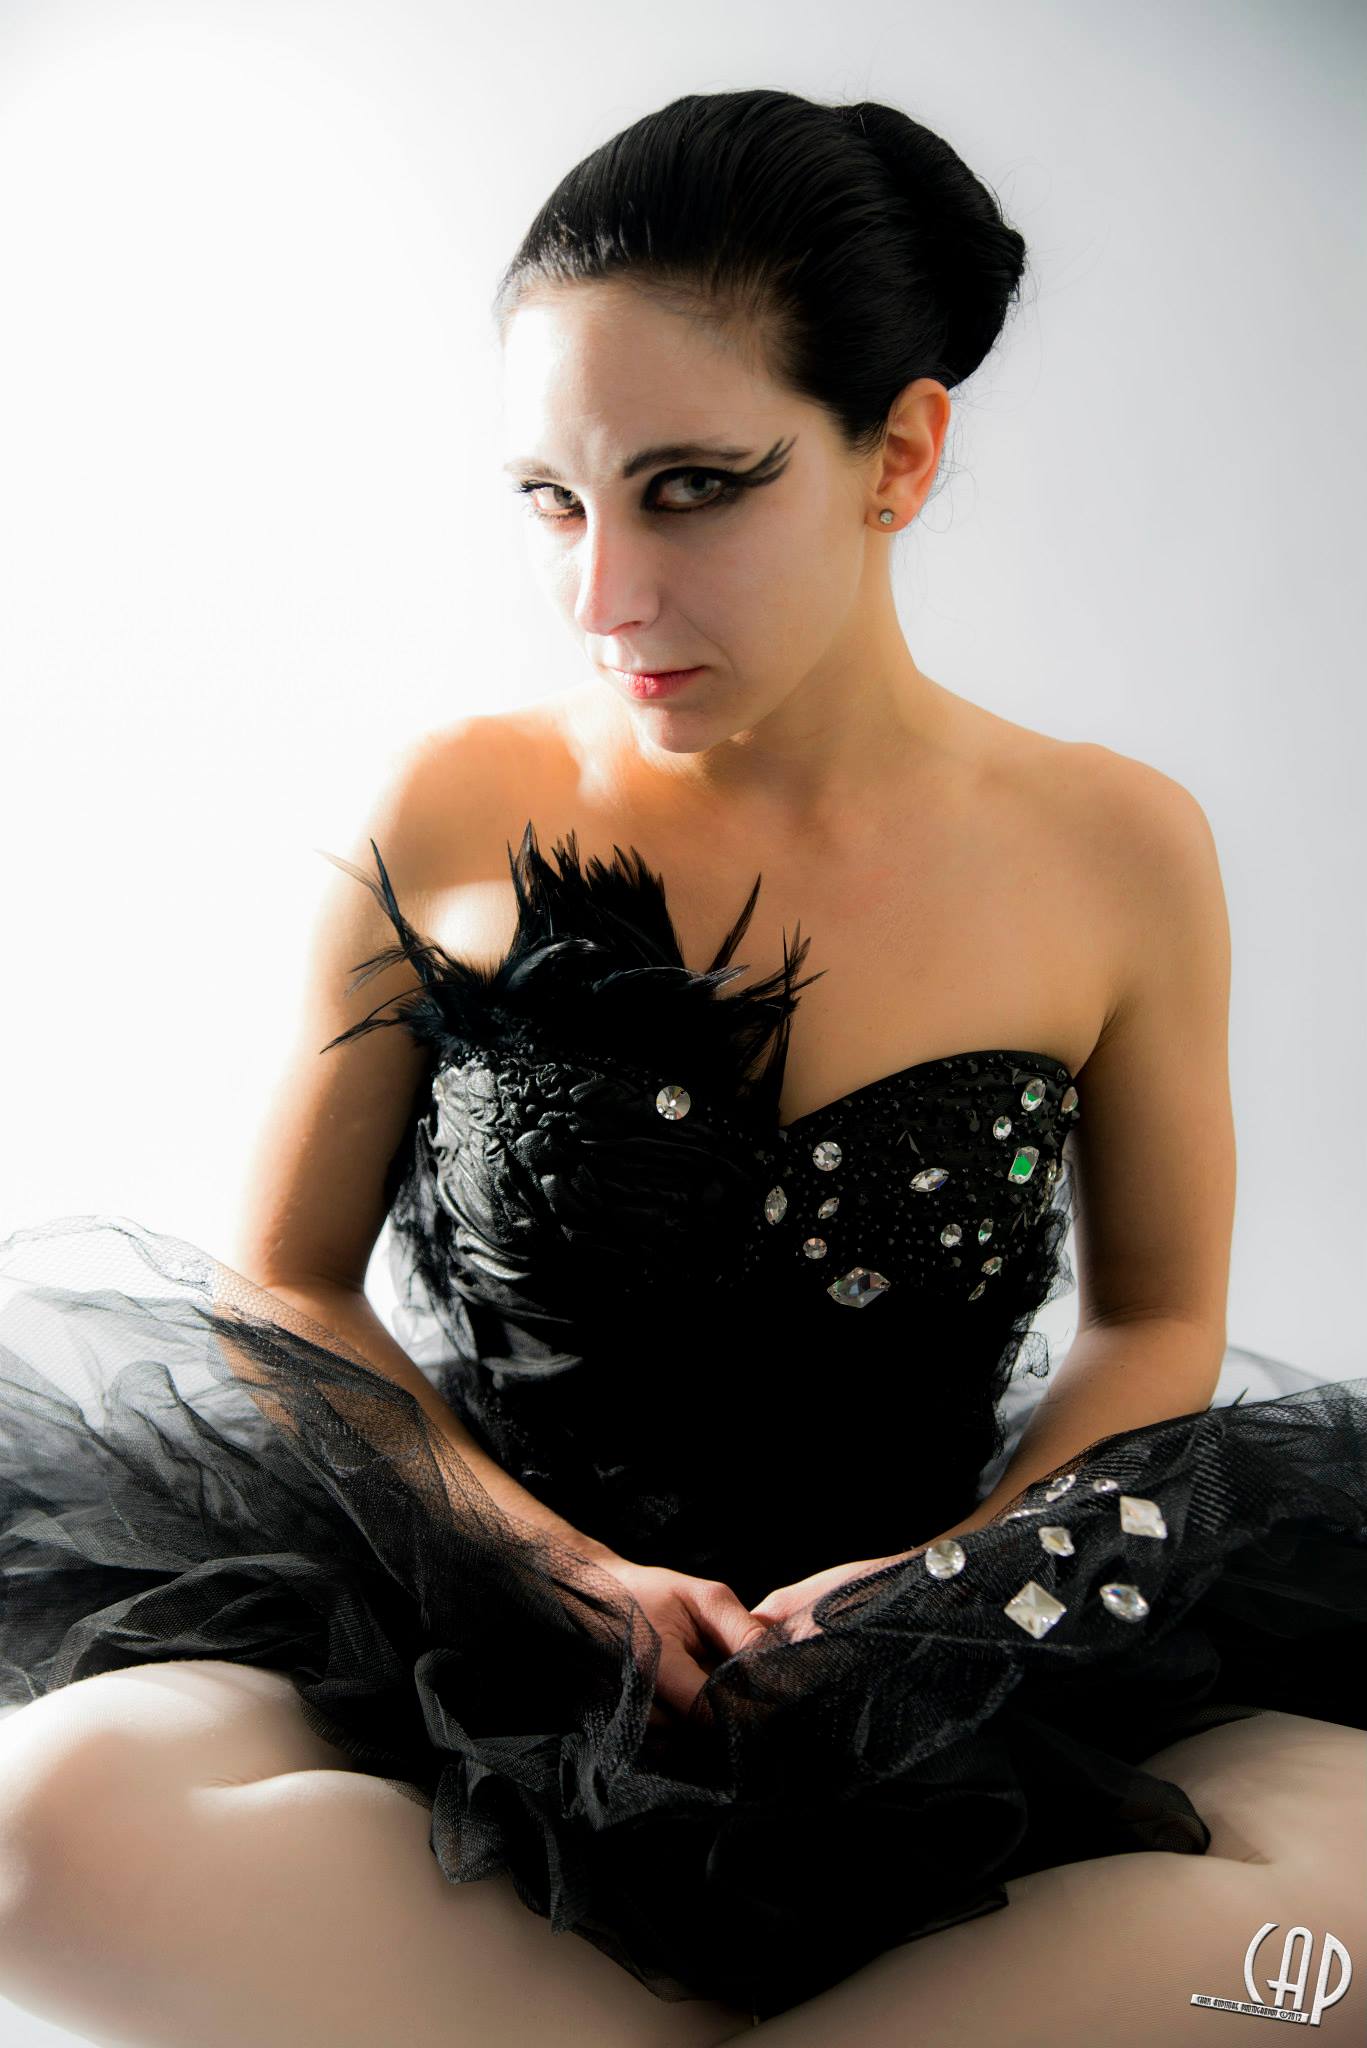 Black Swan costume made by me. Photo by Chris Auditore Photography.